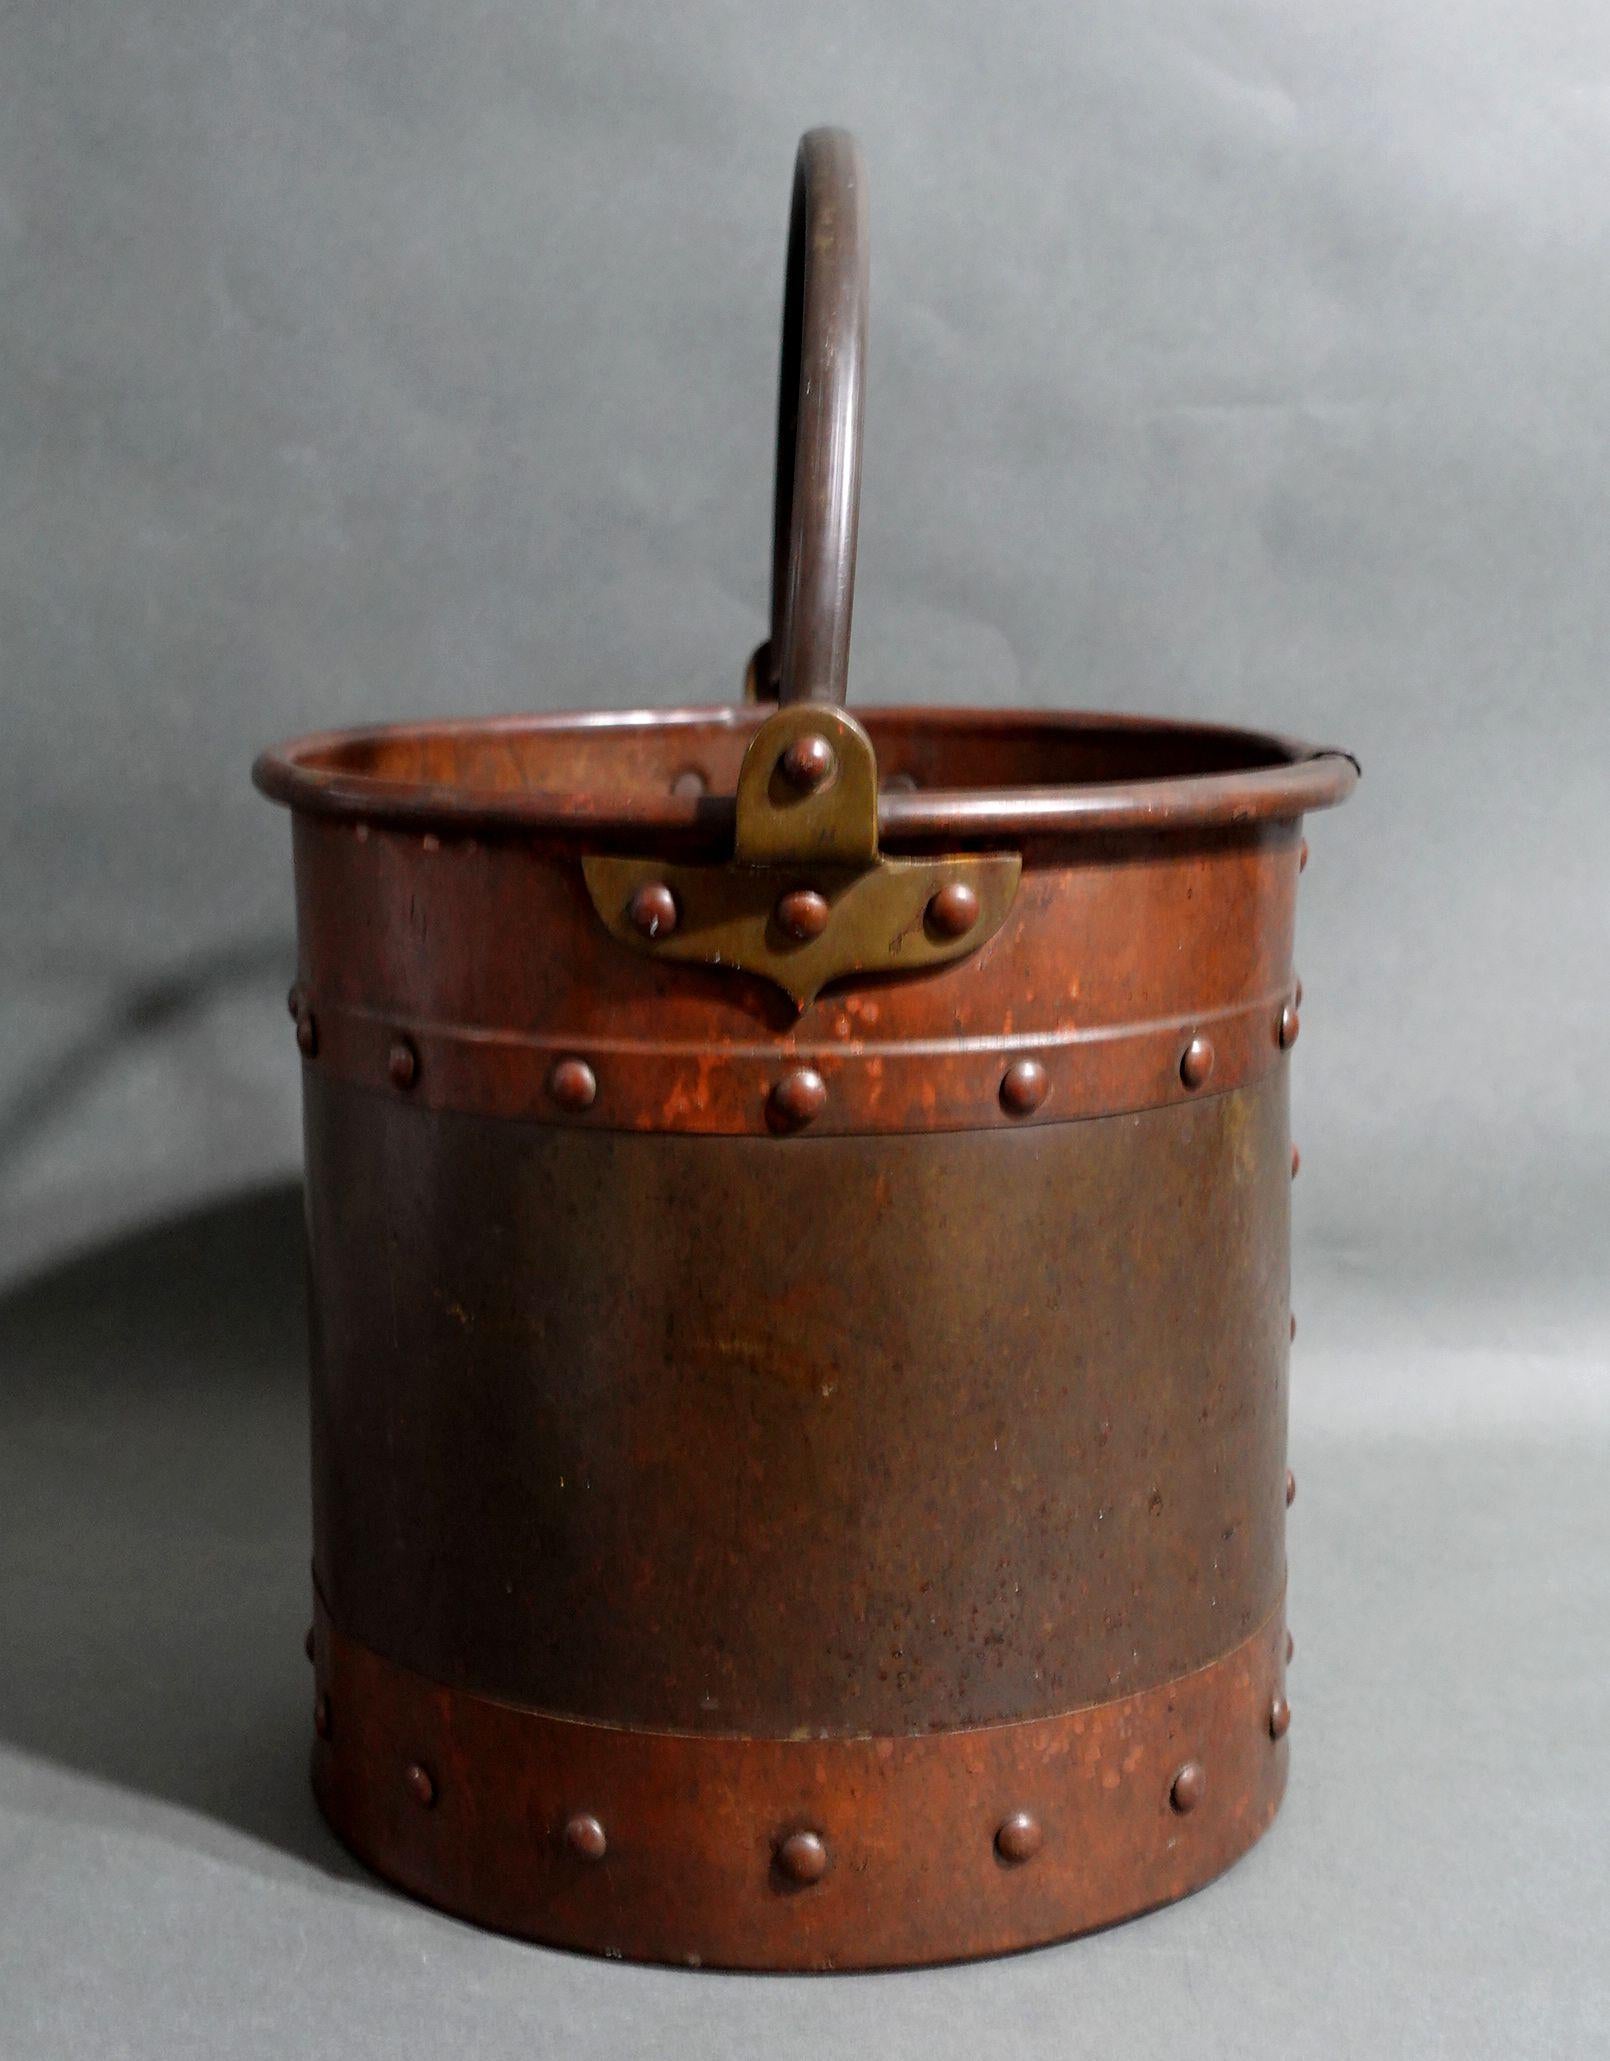 Hand-Crafted Antique Diminutive Copper and Brass Apple Bucket #1 For Sale